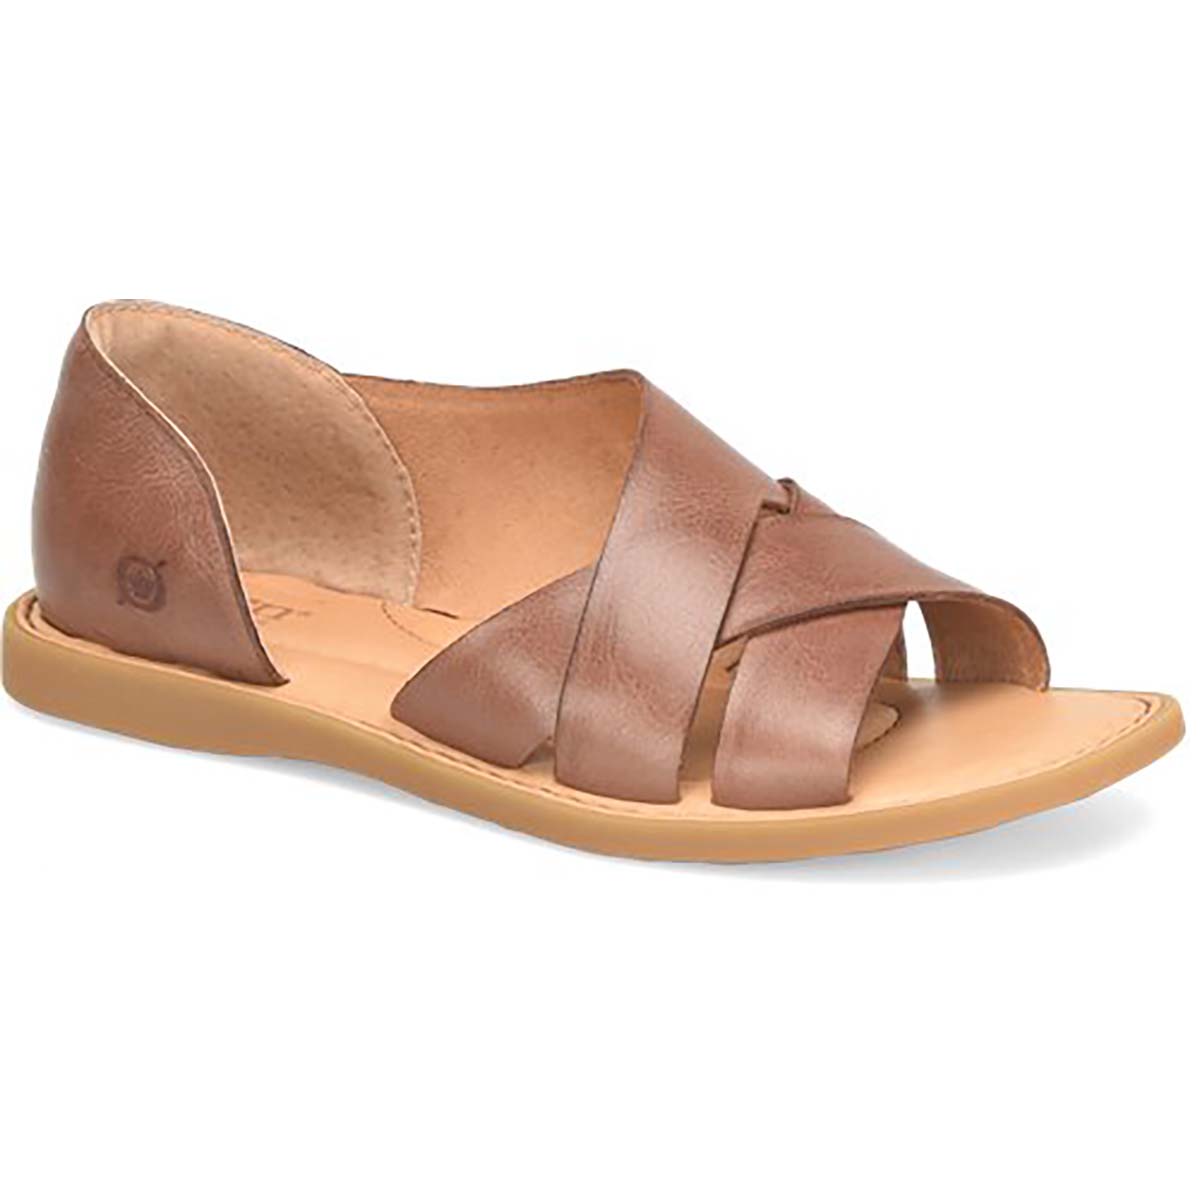 Born Women's Ithica - Brown Almond